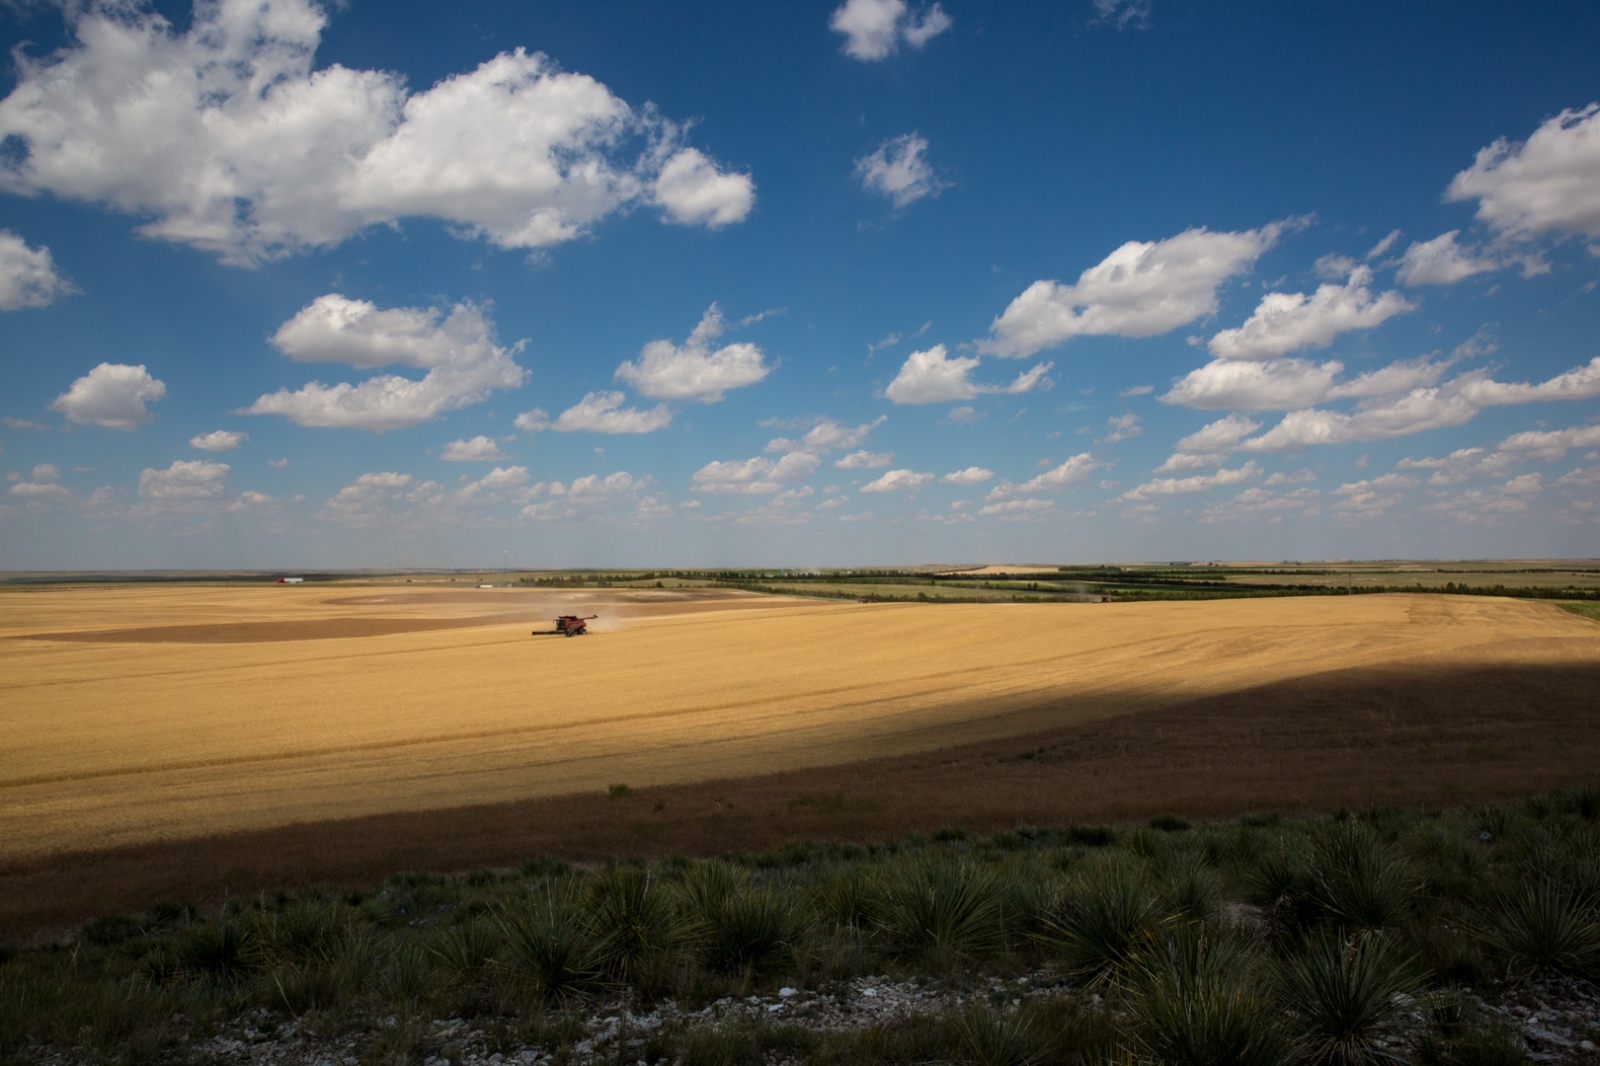 Harvesters -  A combine harvests wheat in Kimball, NE, July 2017. 